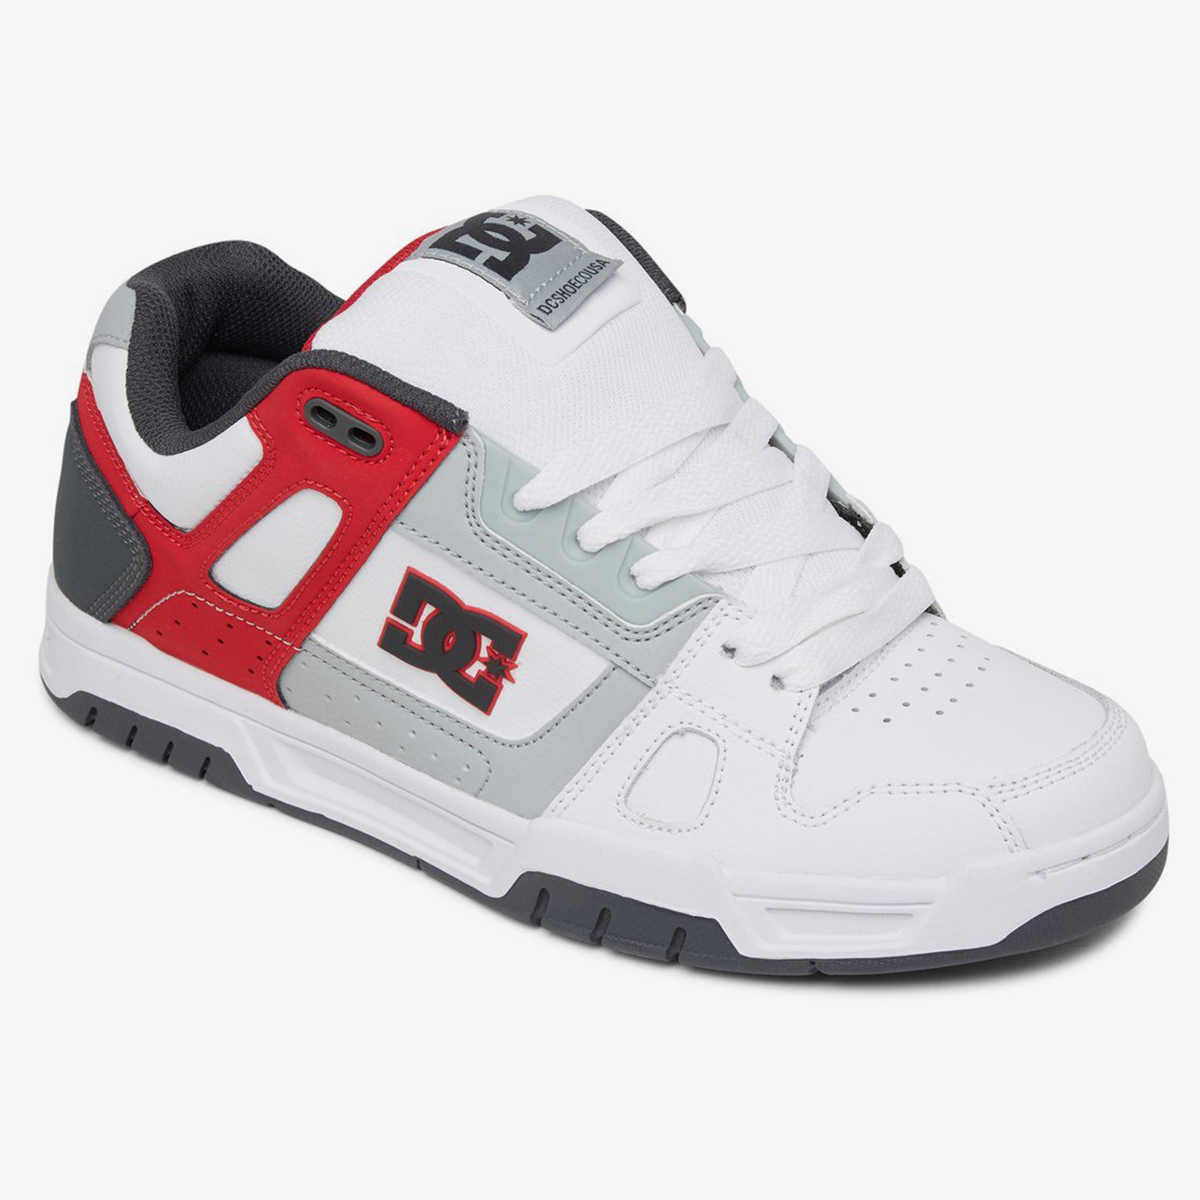 DC Shoes Stag Wyr White/Grey/Red 